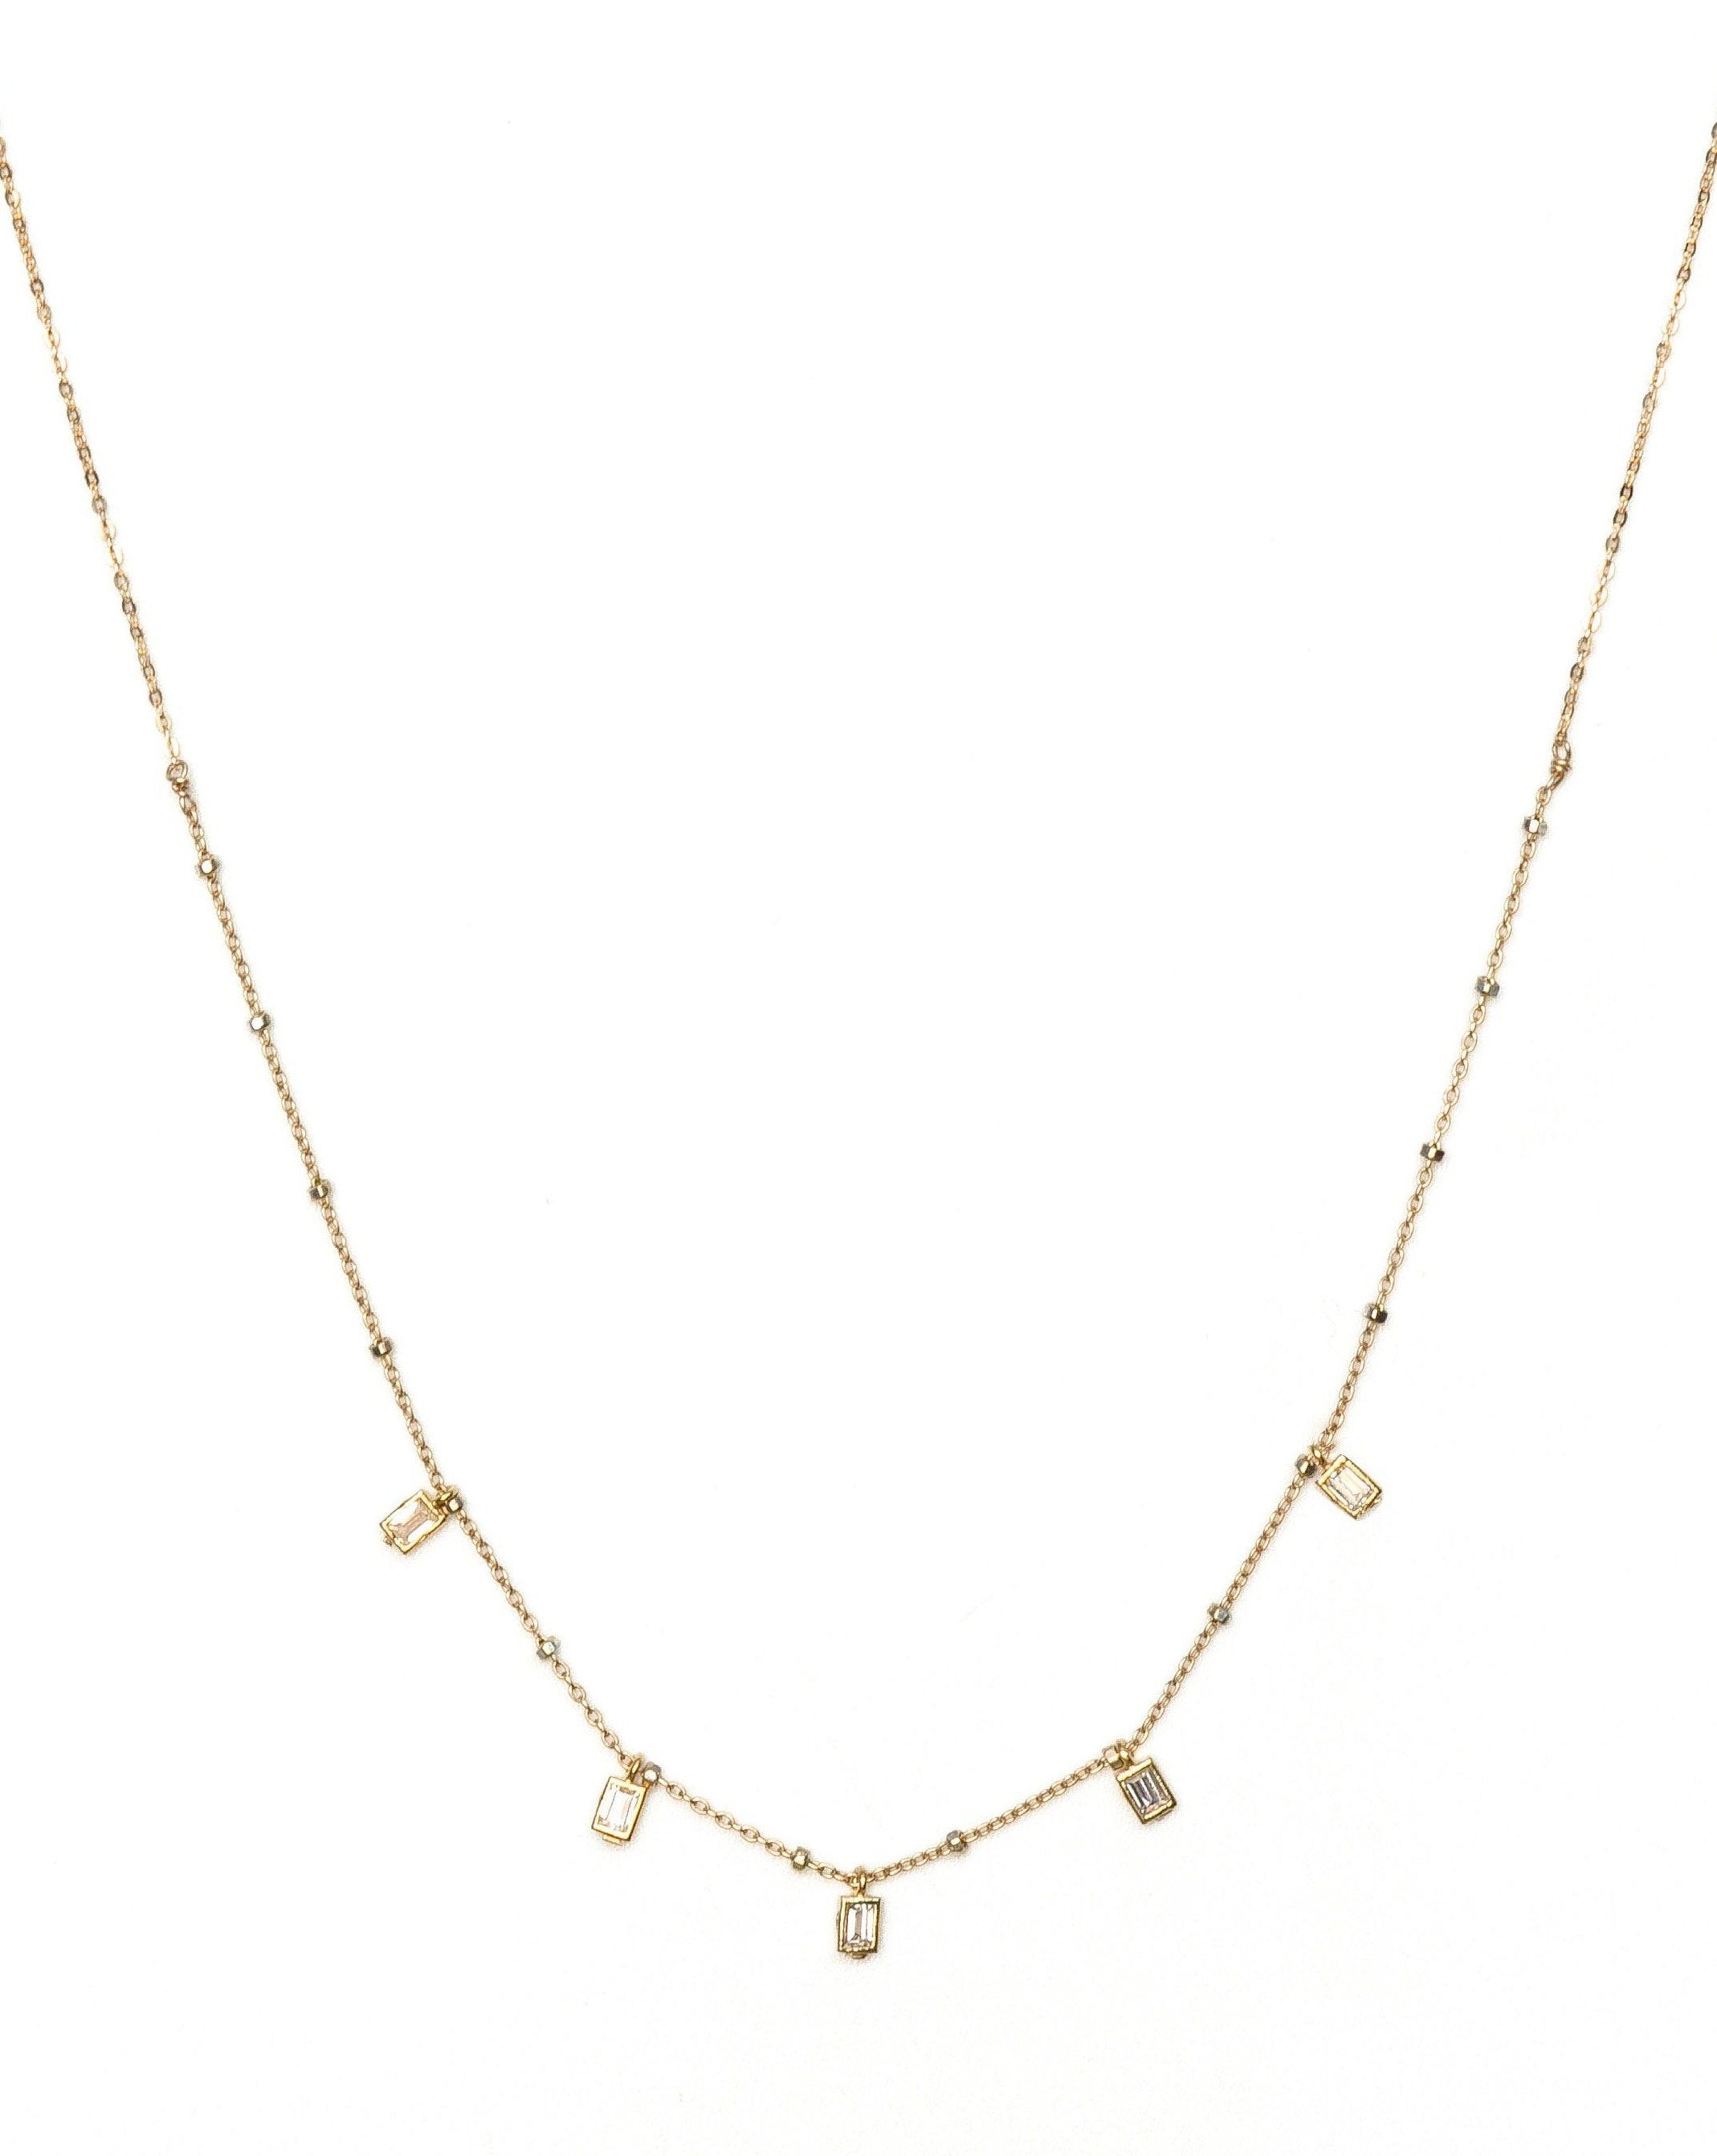 Cinco Necklace by KOZAKH. A 16 inch long necklace in 14K Gold Filled, featuring 3mm rectangular Cubic Zirconias.